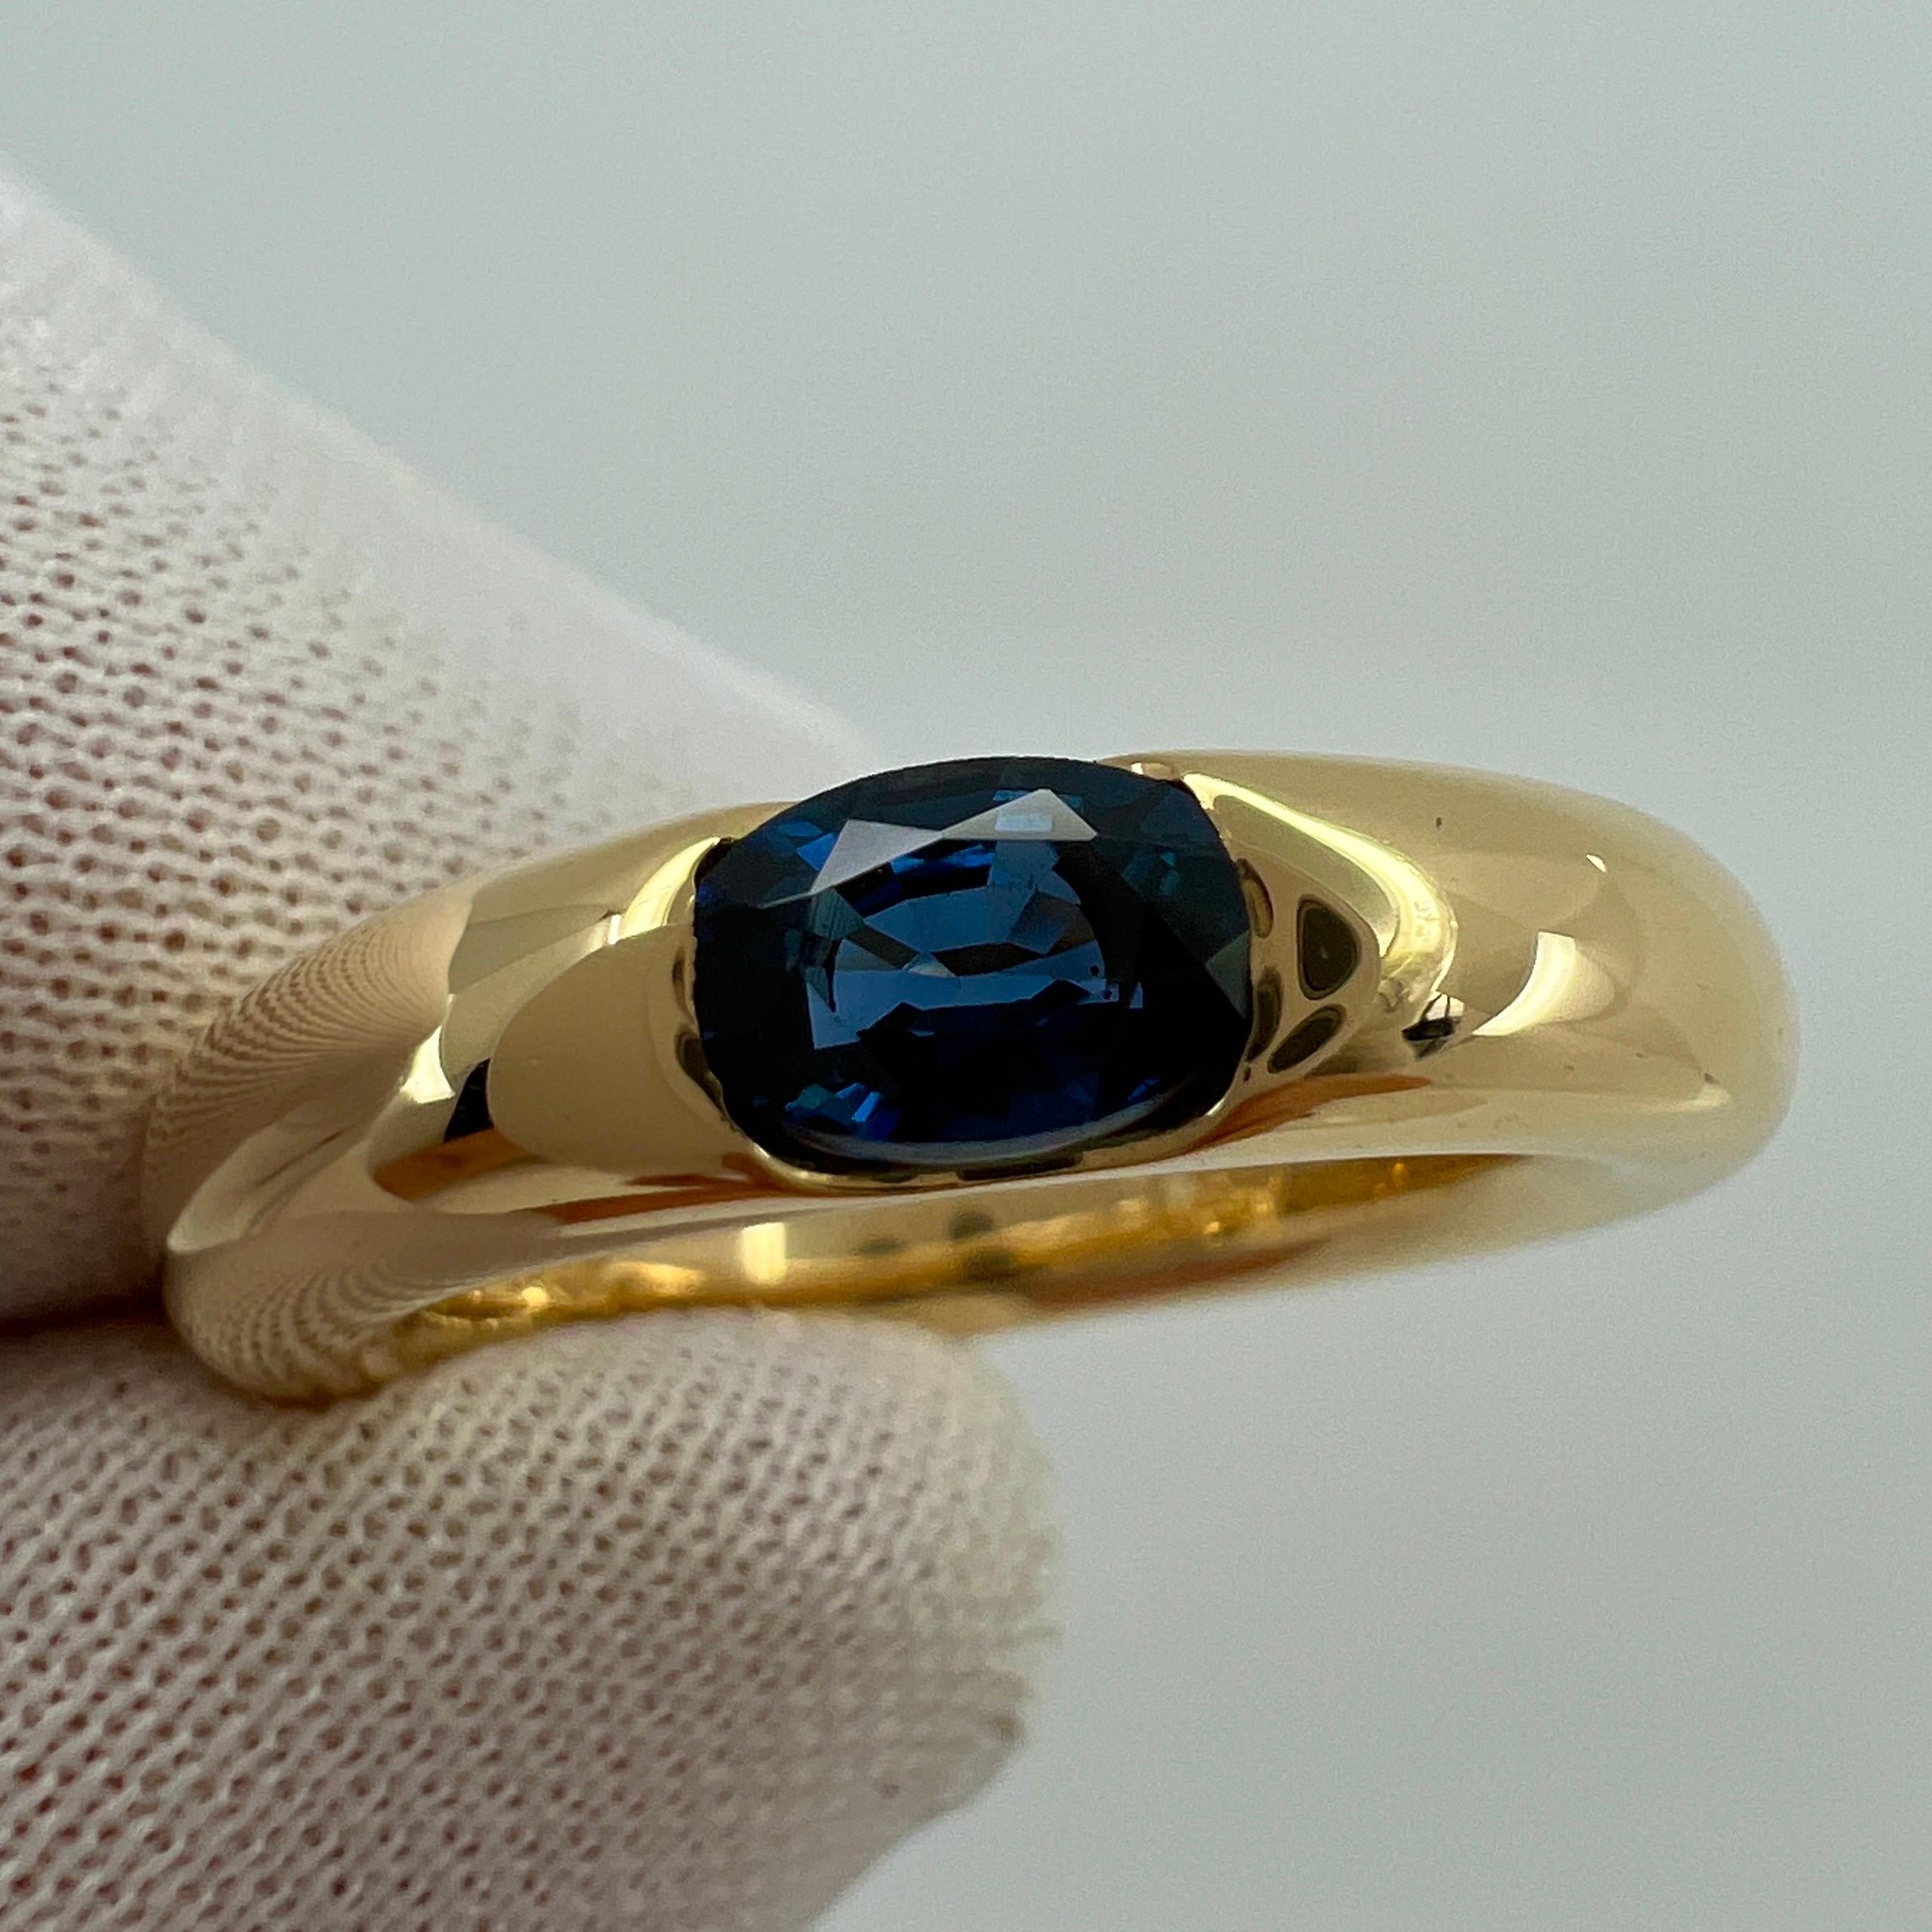 Vintage Cartier Deep Blue Sapphire Oval Ellipse 18k Yellow Gold Solitaire Ring 5 5